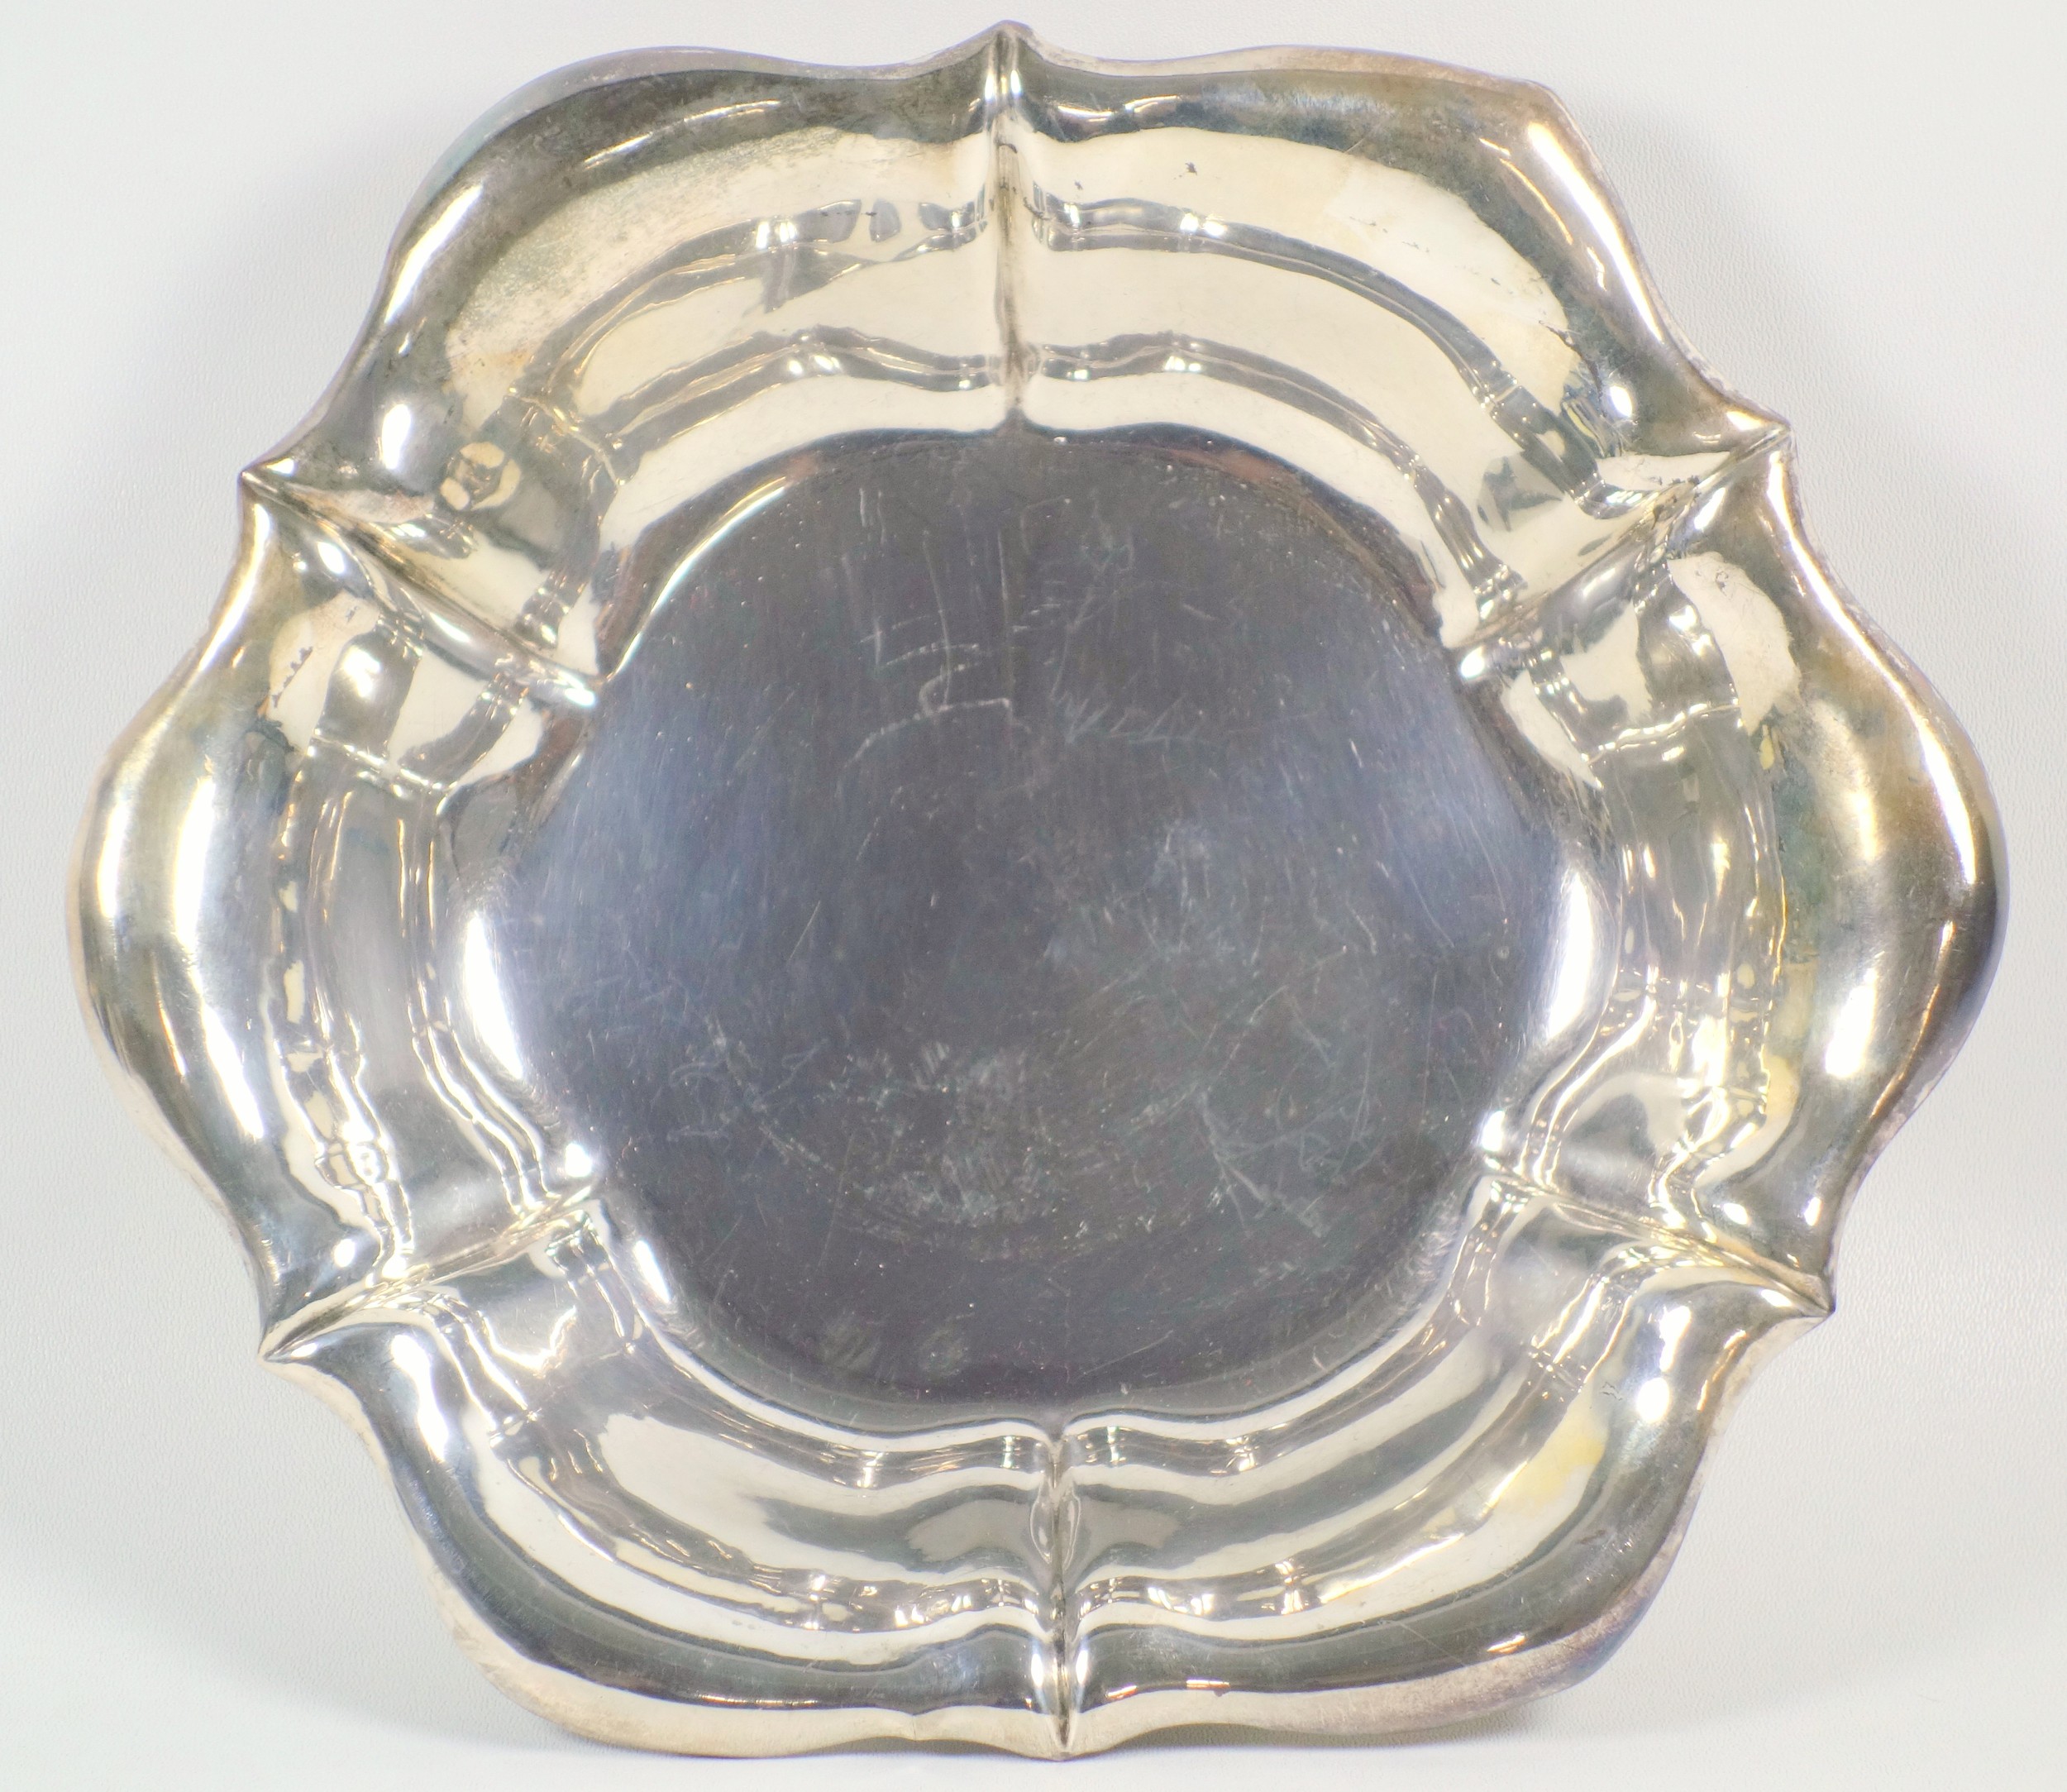 Peruvian white metal hexafoil shaped bowl with fluted sides stamped “Sterling 925”, D 27.7cm. 336.